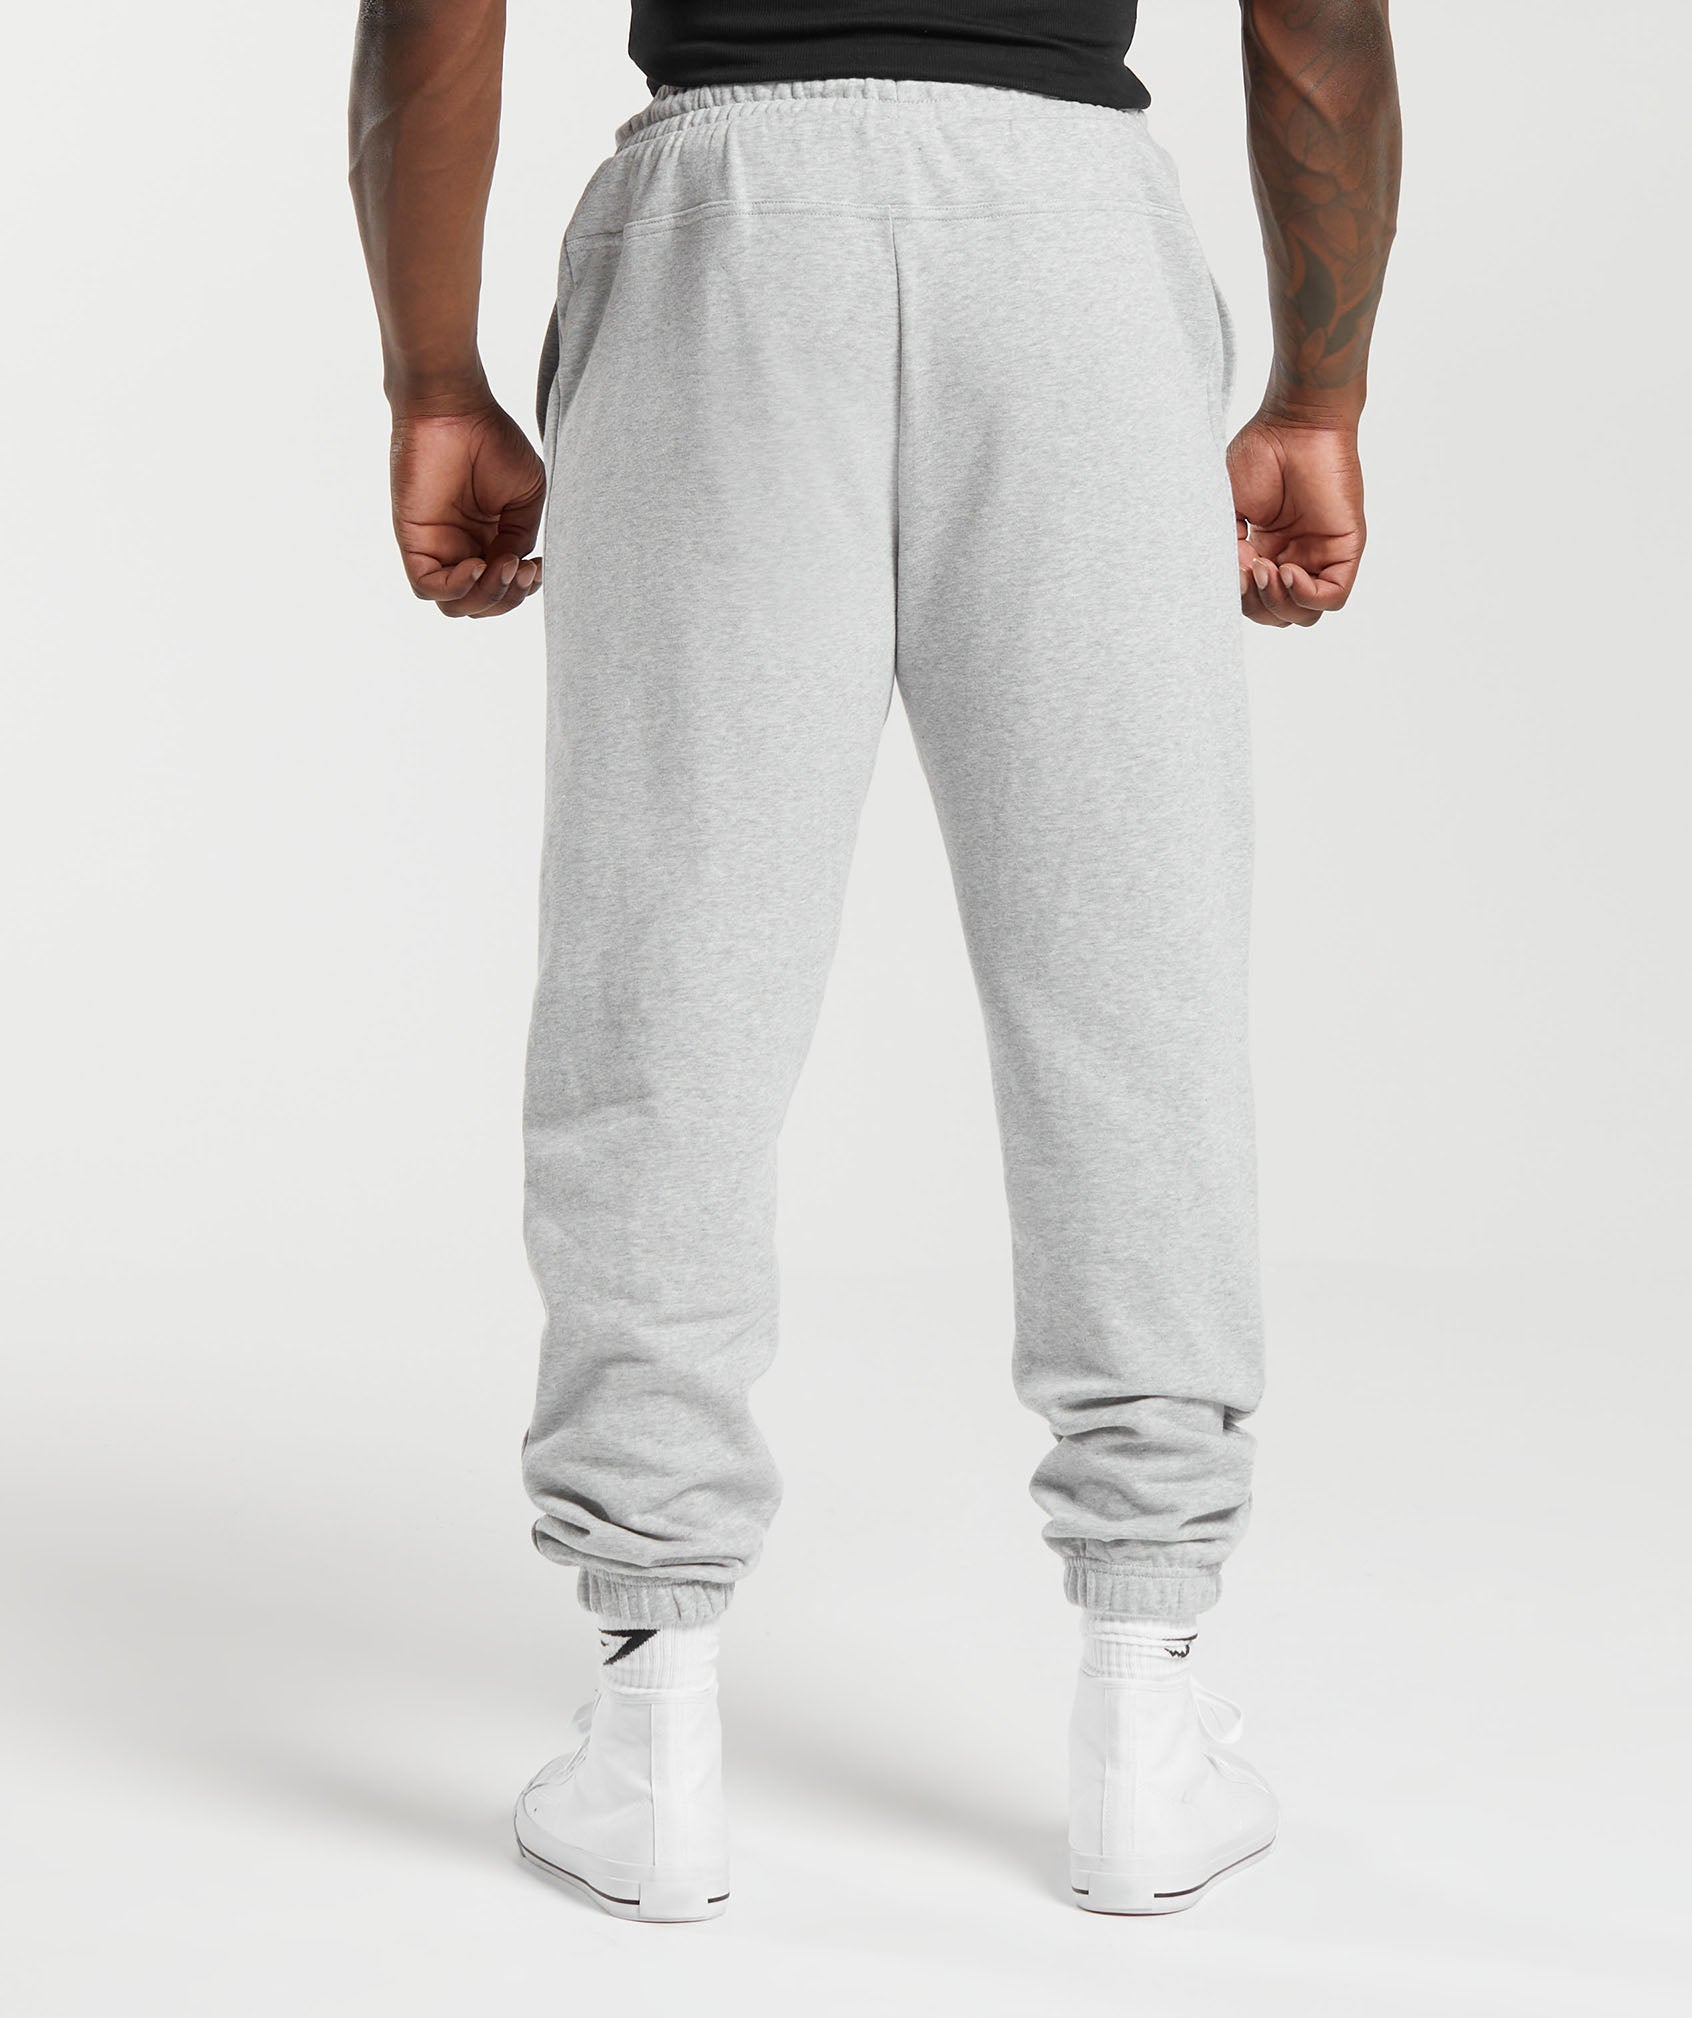 Global Lifting Oversized Joggers in Grey - view 2